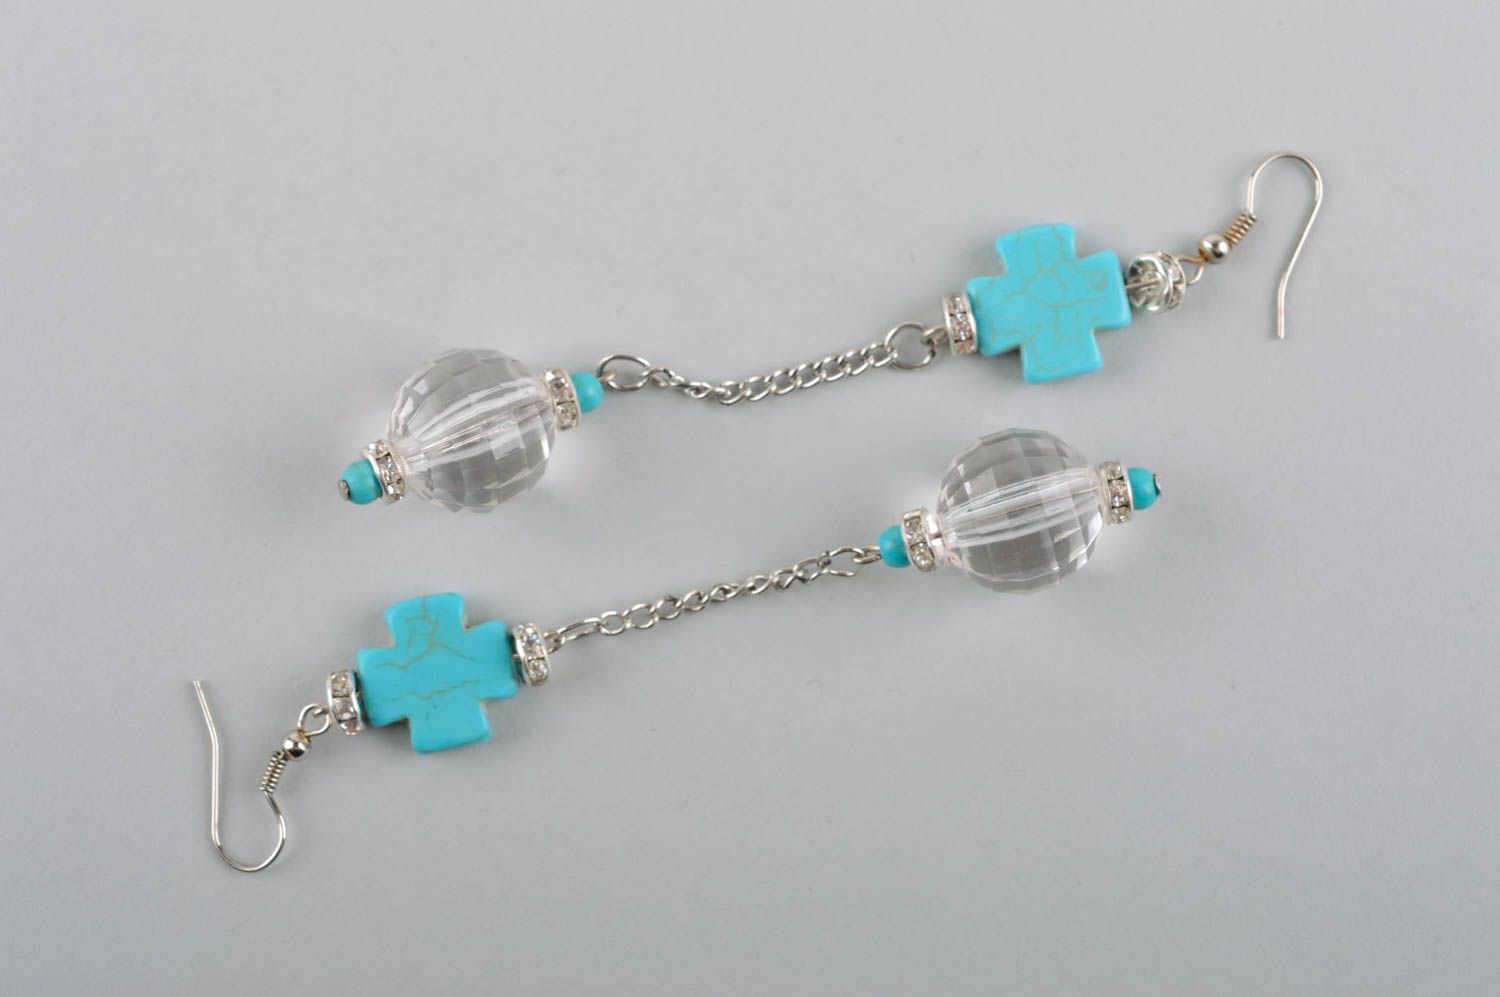 Handmade earrings with turquoise long earrings with charms evening jewelry photo 3